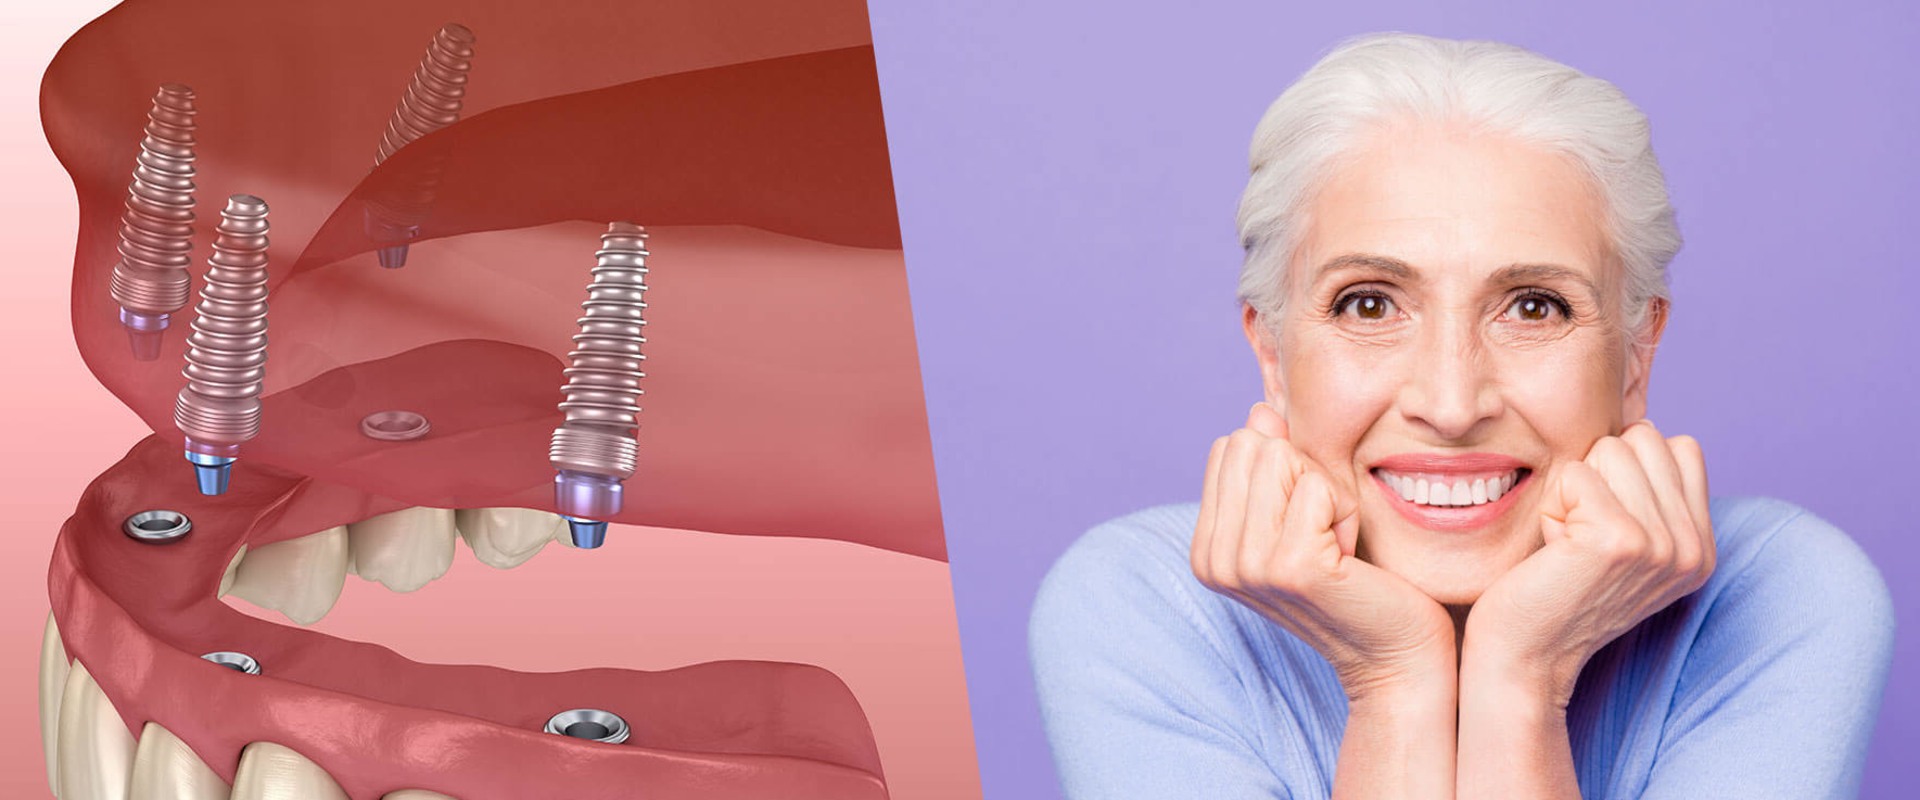 Diagnosis and Preparation for Dental Implants